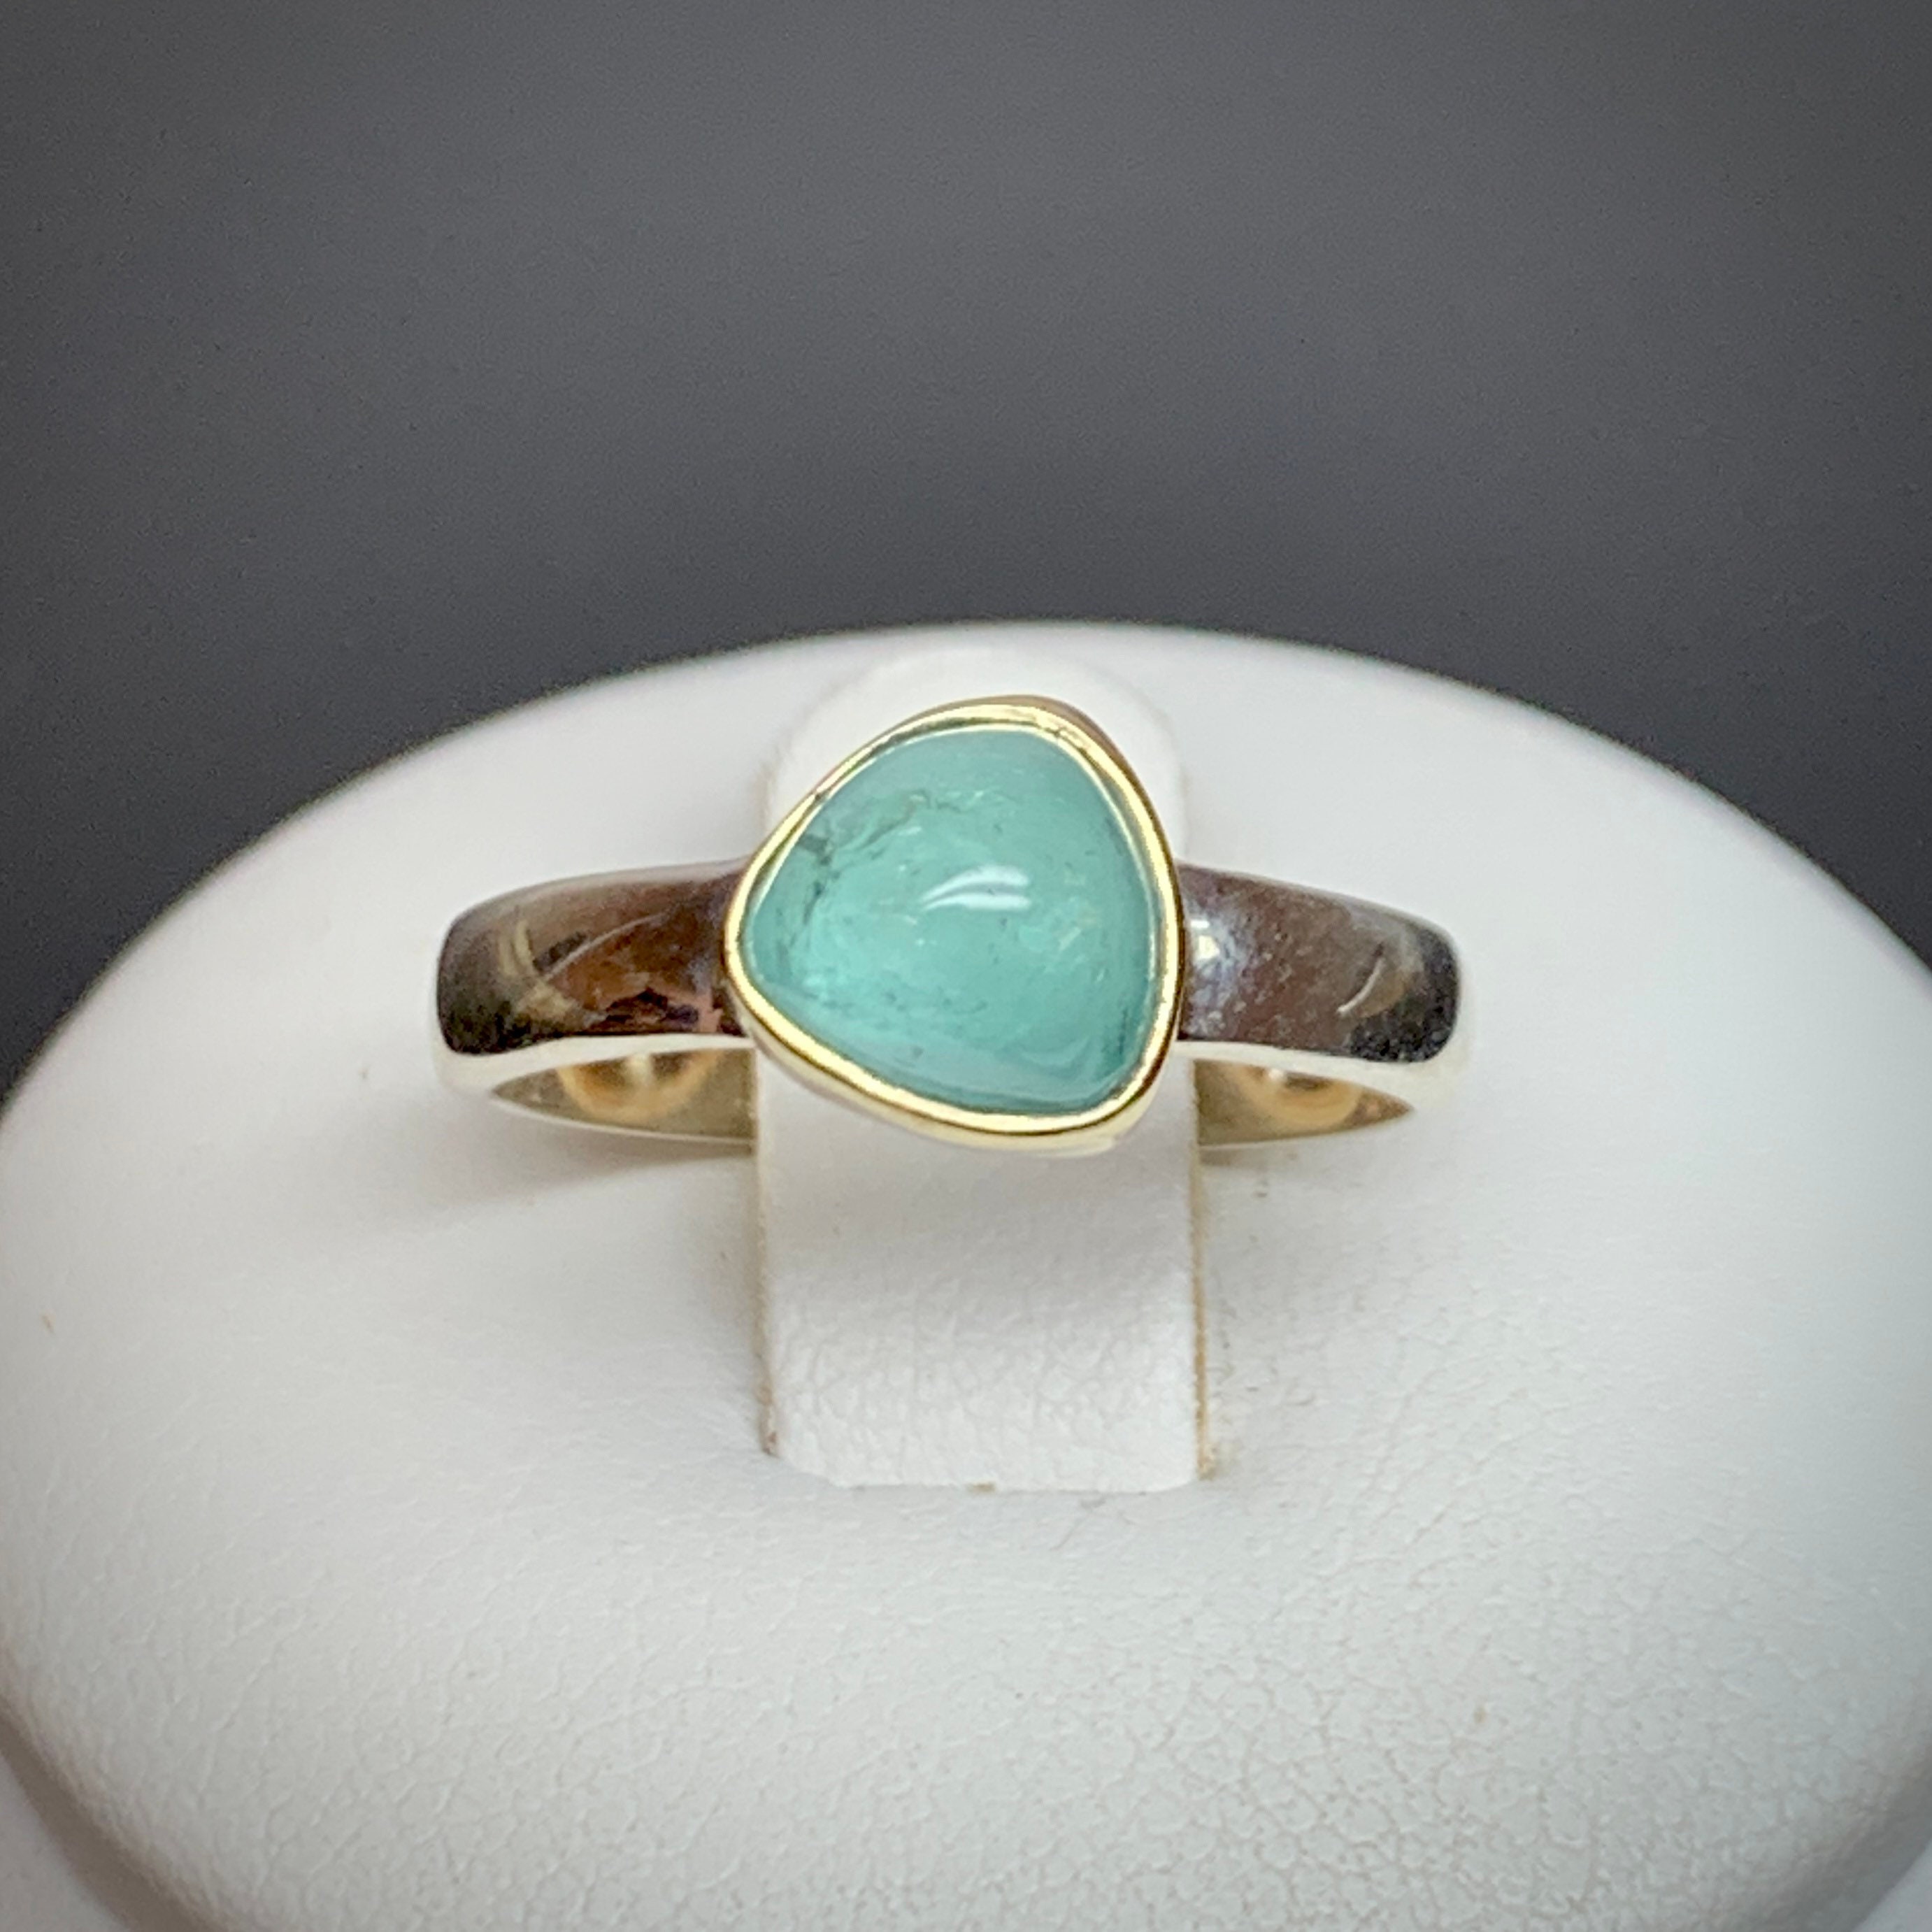 14K Gold Setting Sterling Silver Ring Jewellery Rings Solitaire Rings Paraiba Like Tourmaline Sugarloaf Cabochon 